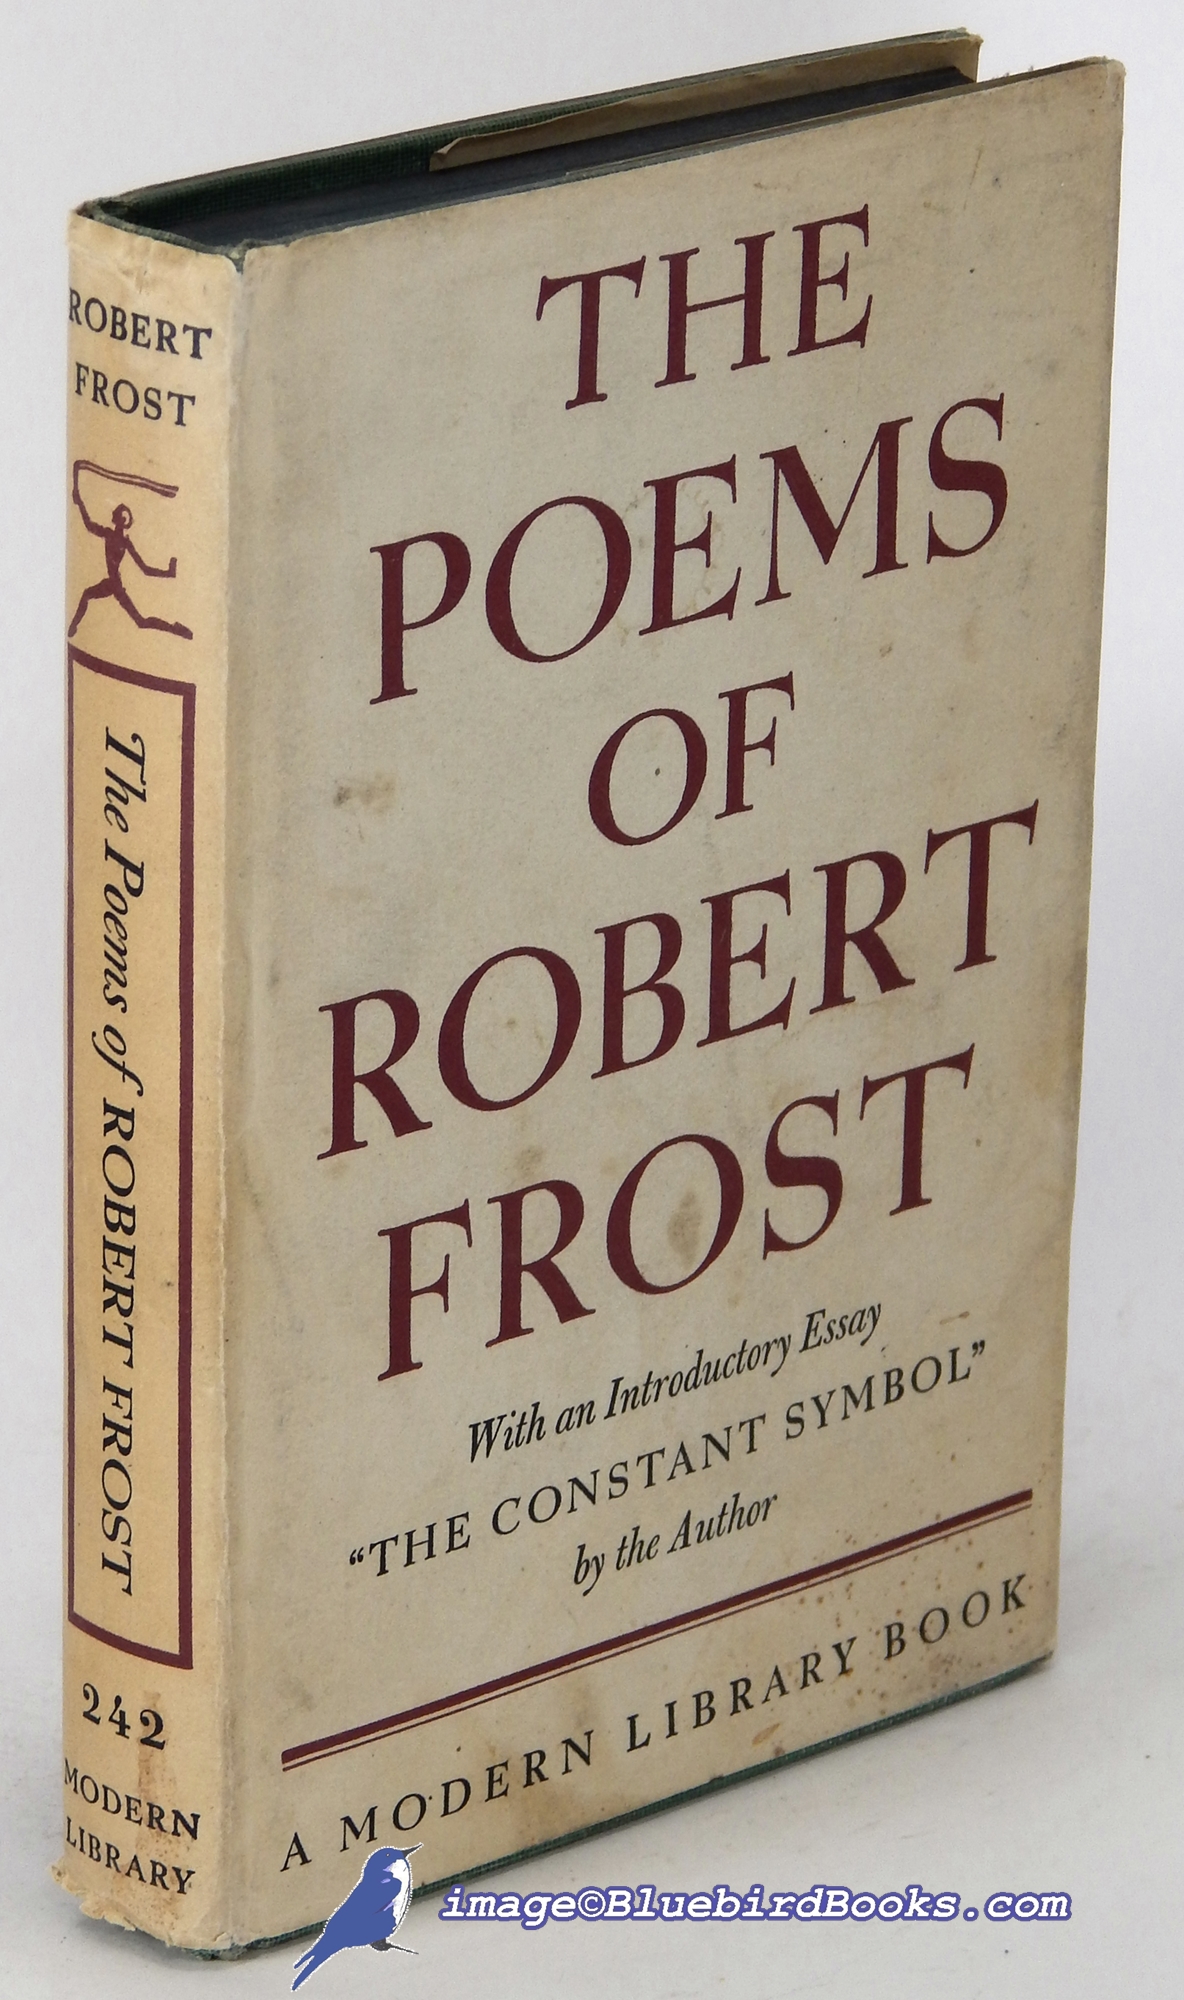 Image for The Poems of Robert Frost, With an Introductory Essay "The Constant Symbol" by the Author (Modern Library #242.1)